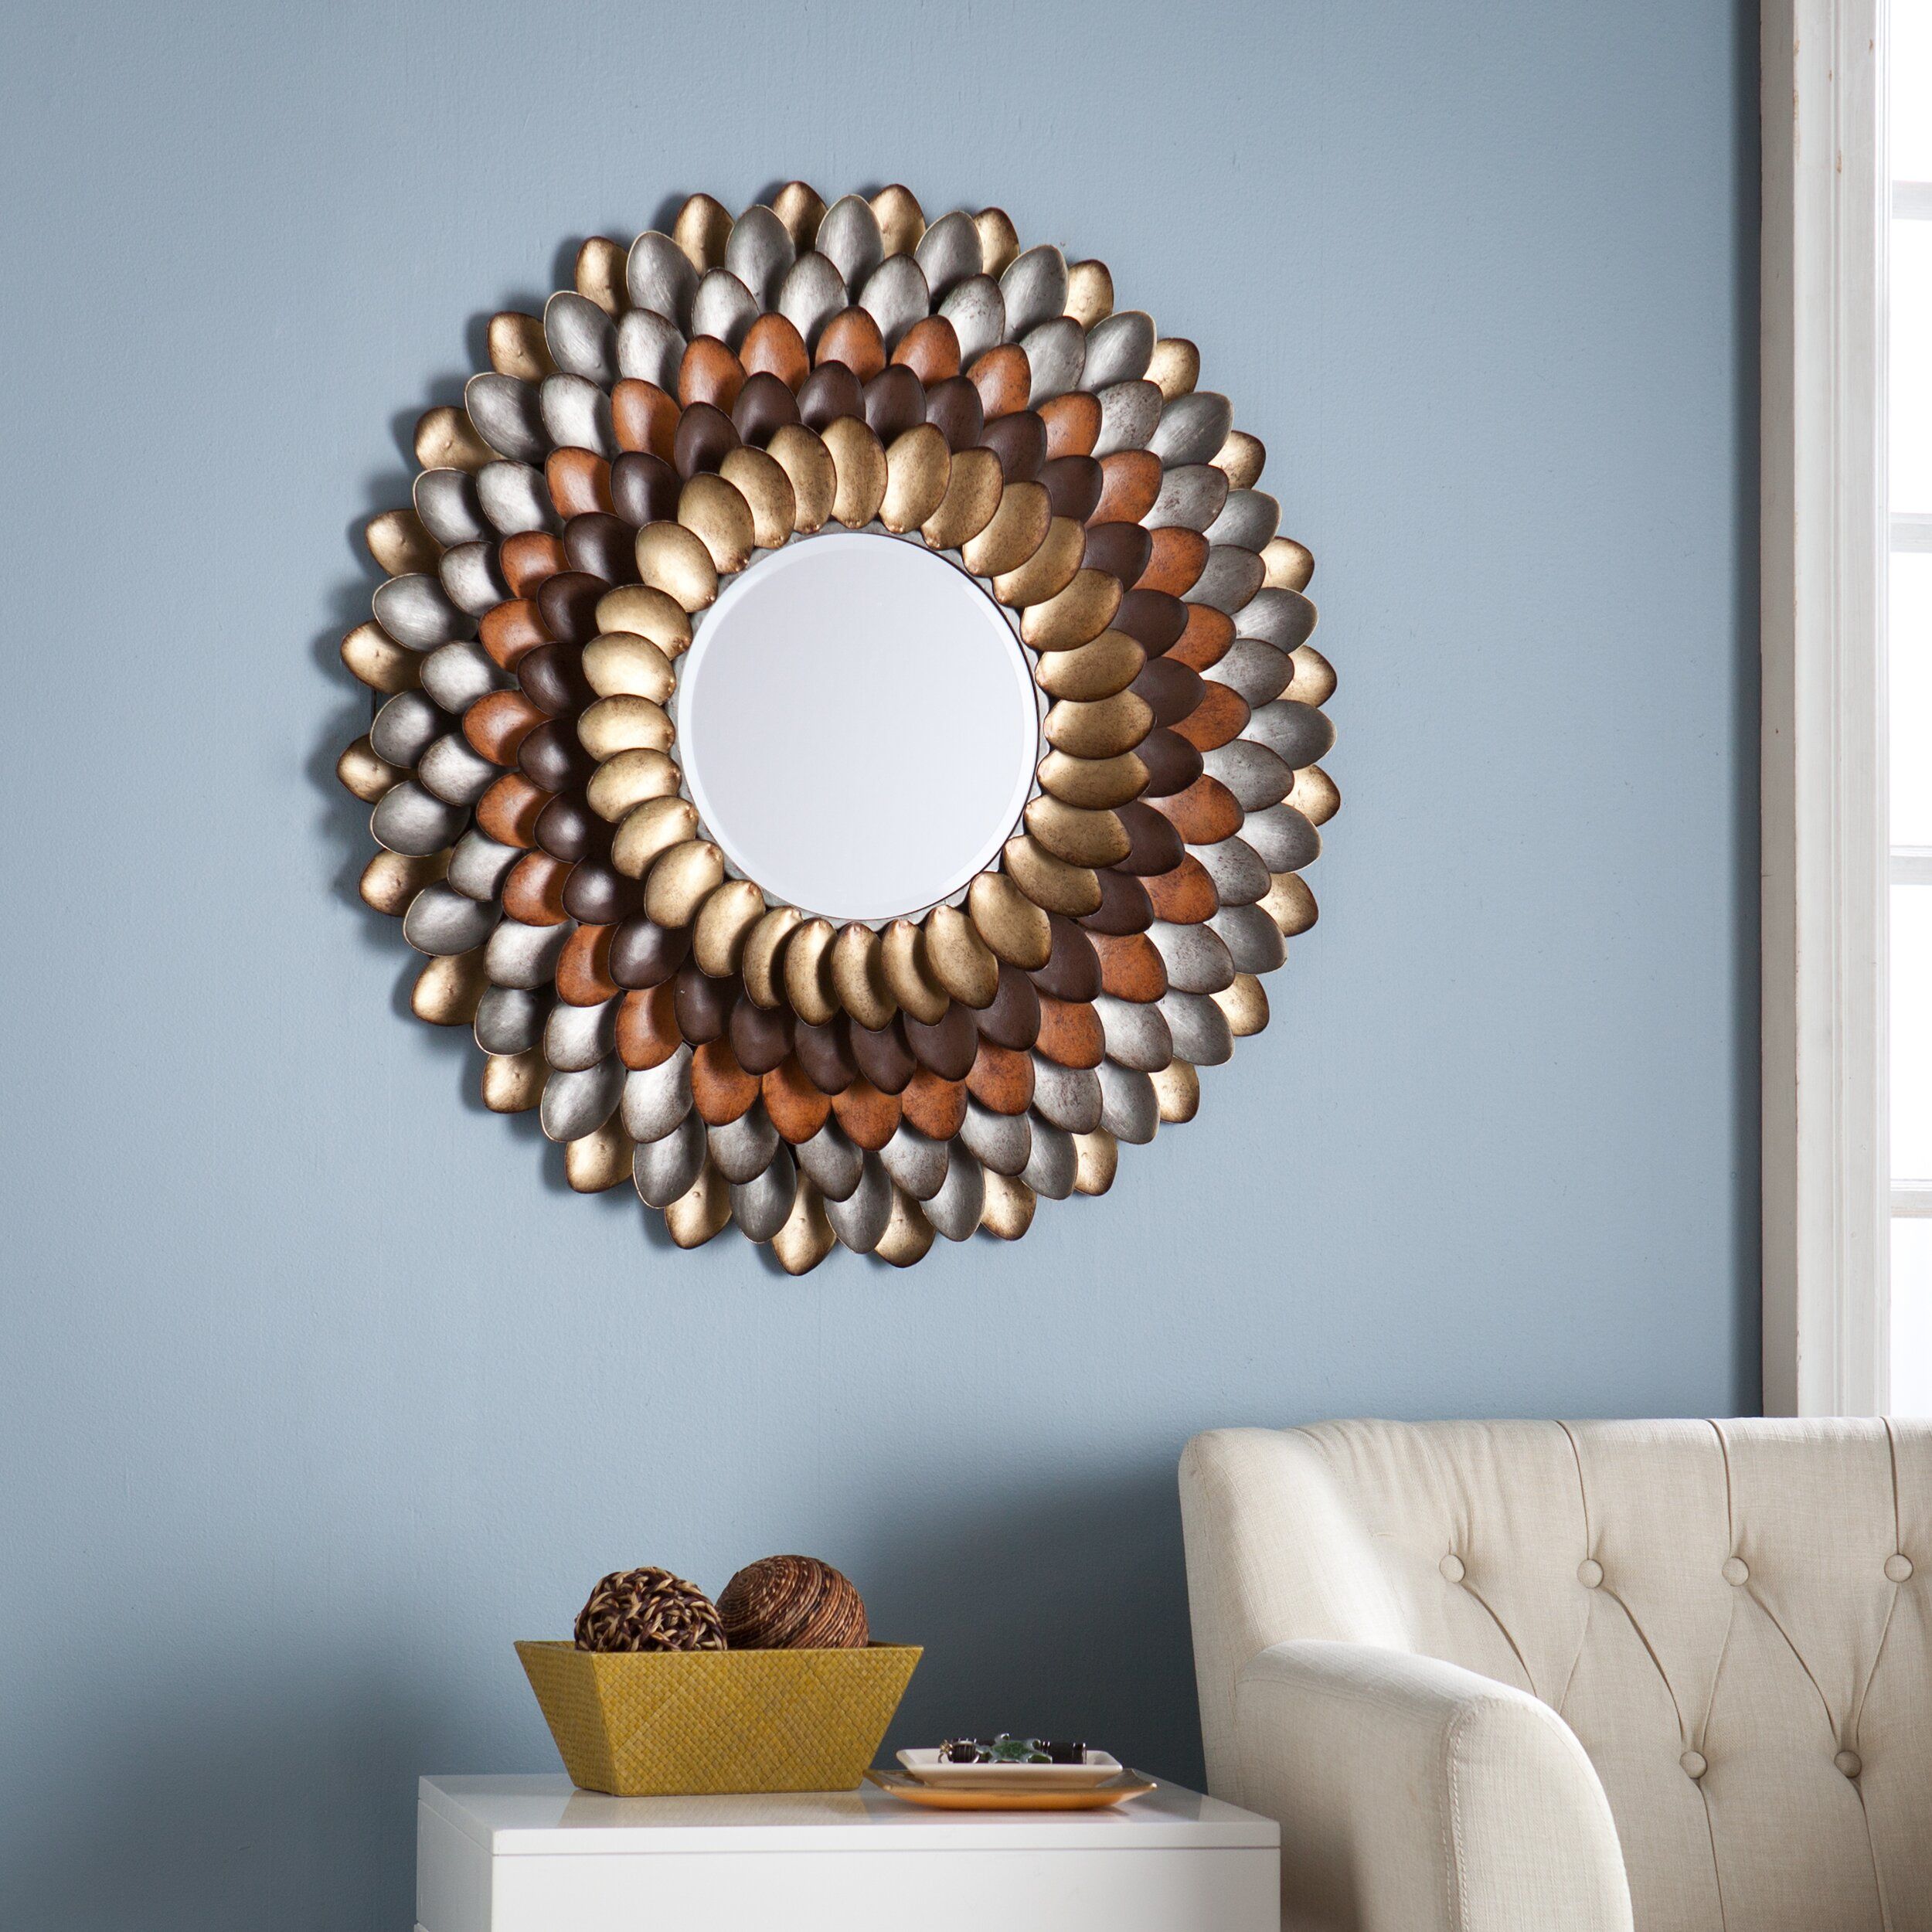 Wildon Home ® Abrams Decorative Round Wall Mirror & Reviews | Wayfair Inside Vertical Round Wall Mirrors (Photo 6 of 15)